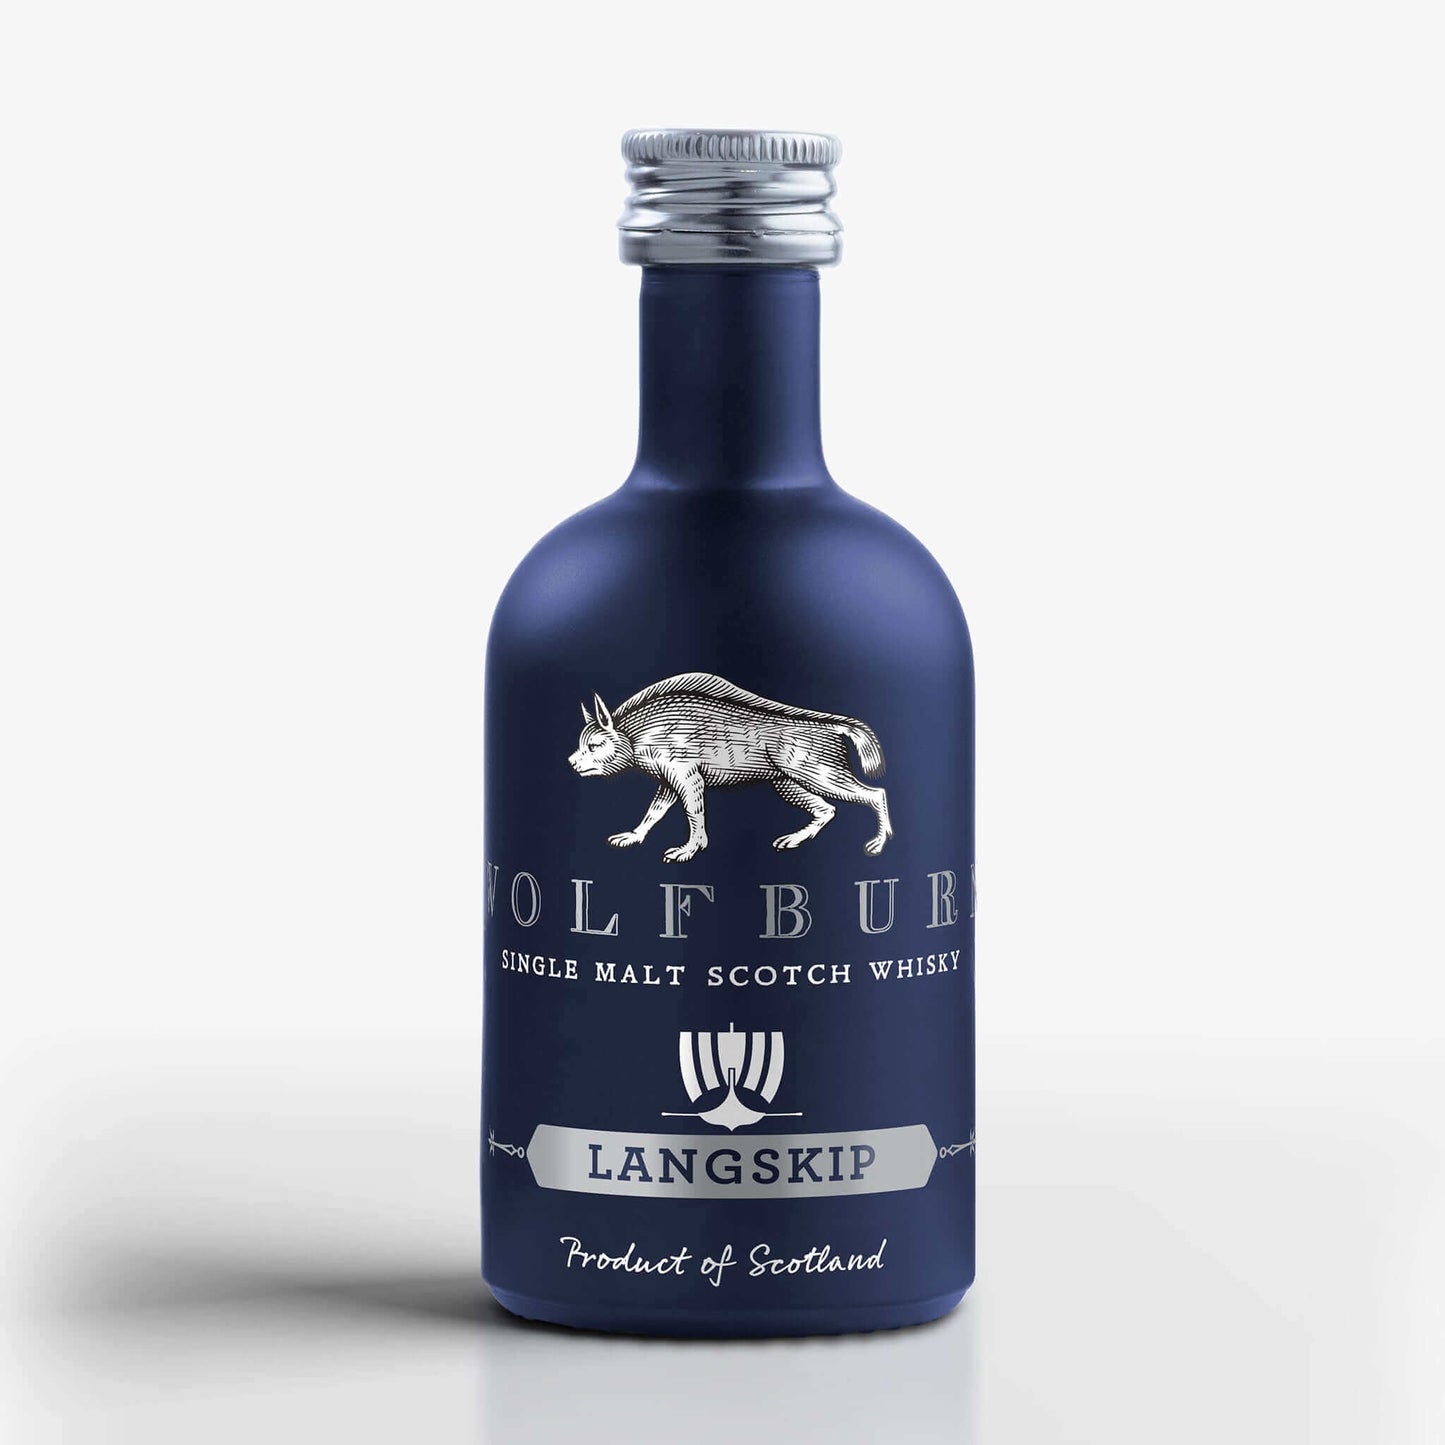 Wolfburn Langskip Miniature – 58% vol. 5cl A miniature bottle of Langskip with the same familiar taste and quality as its big brother, just even easier to carry on the move. A sweet, balanced and beautifully easy-drinking dram, Langskip’s strength is matc